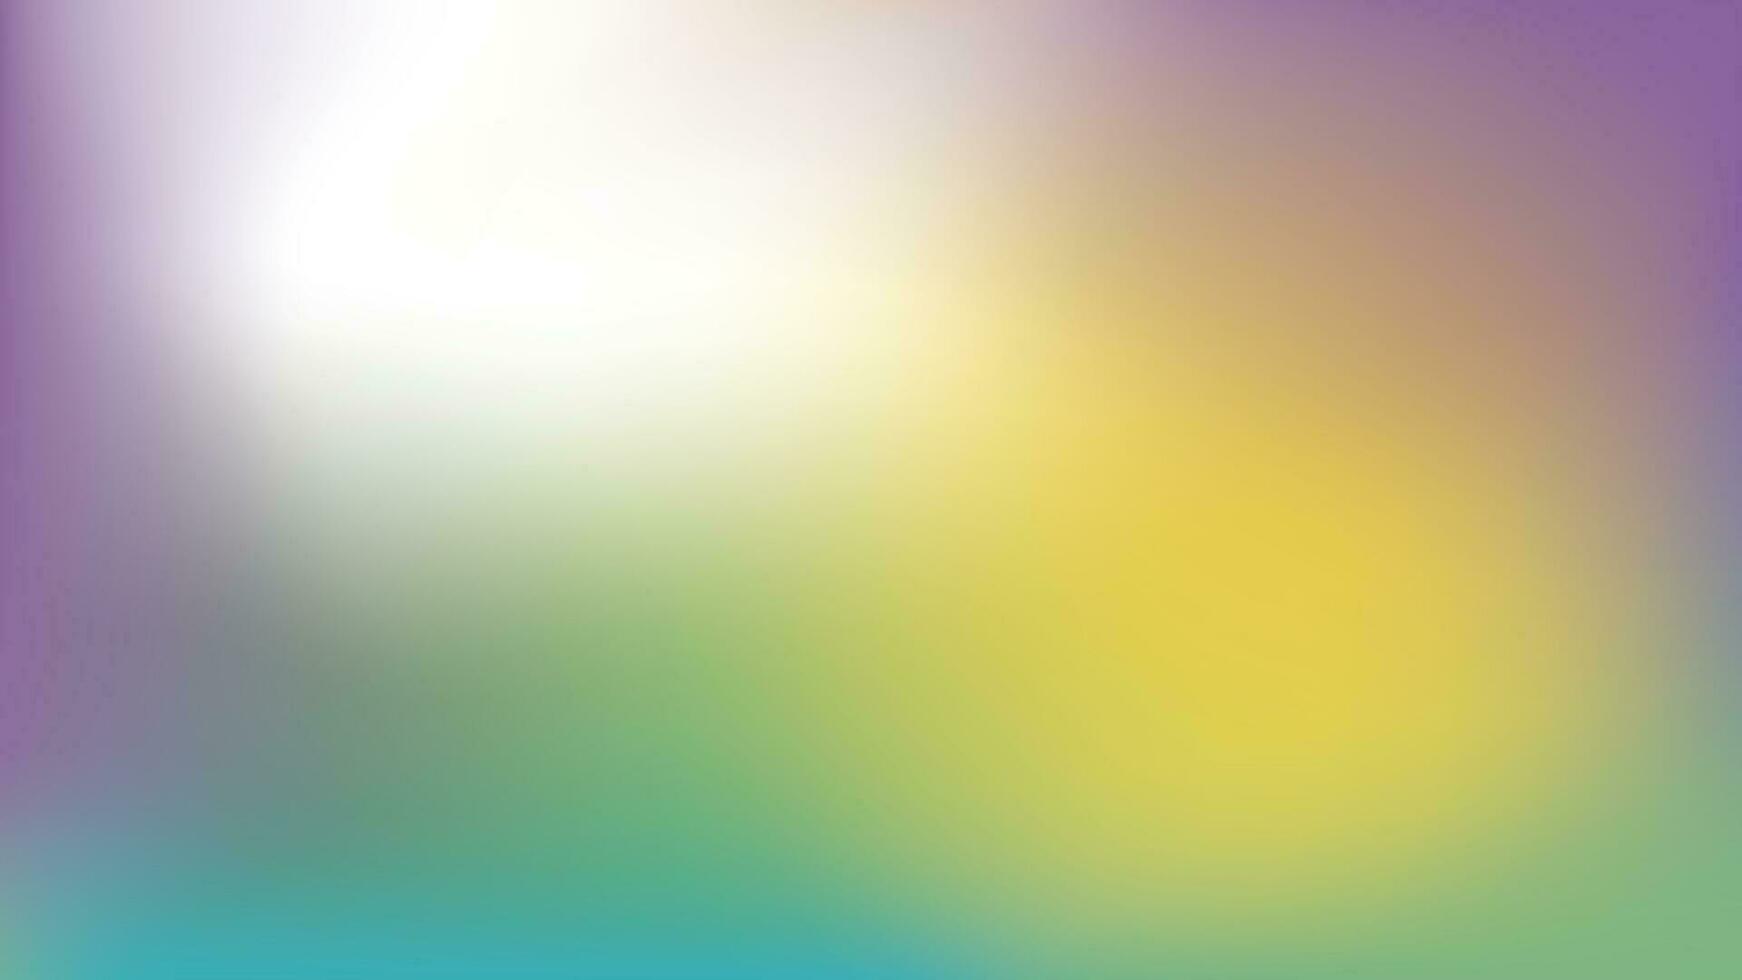 Abstract colorful blurred gradient background with yellow, green, pink, purple and blue color. Vector illustration.